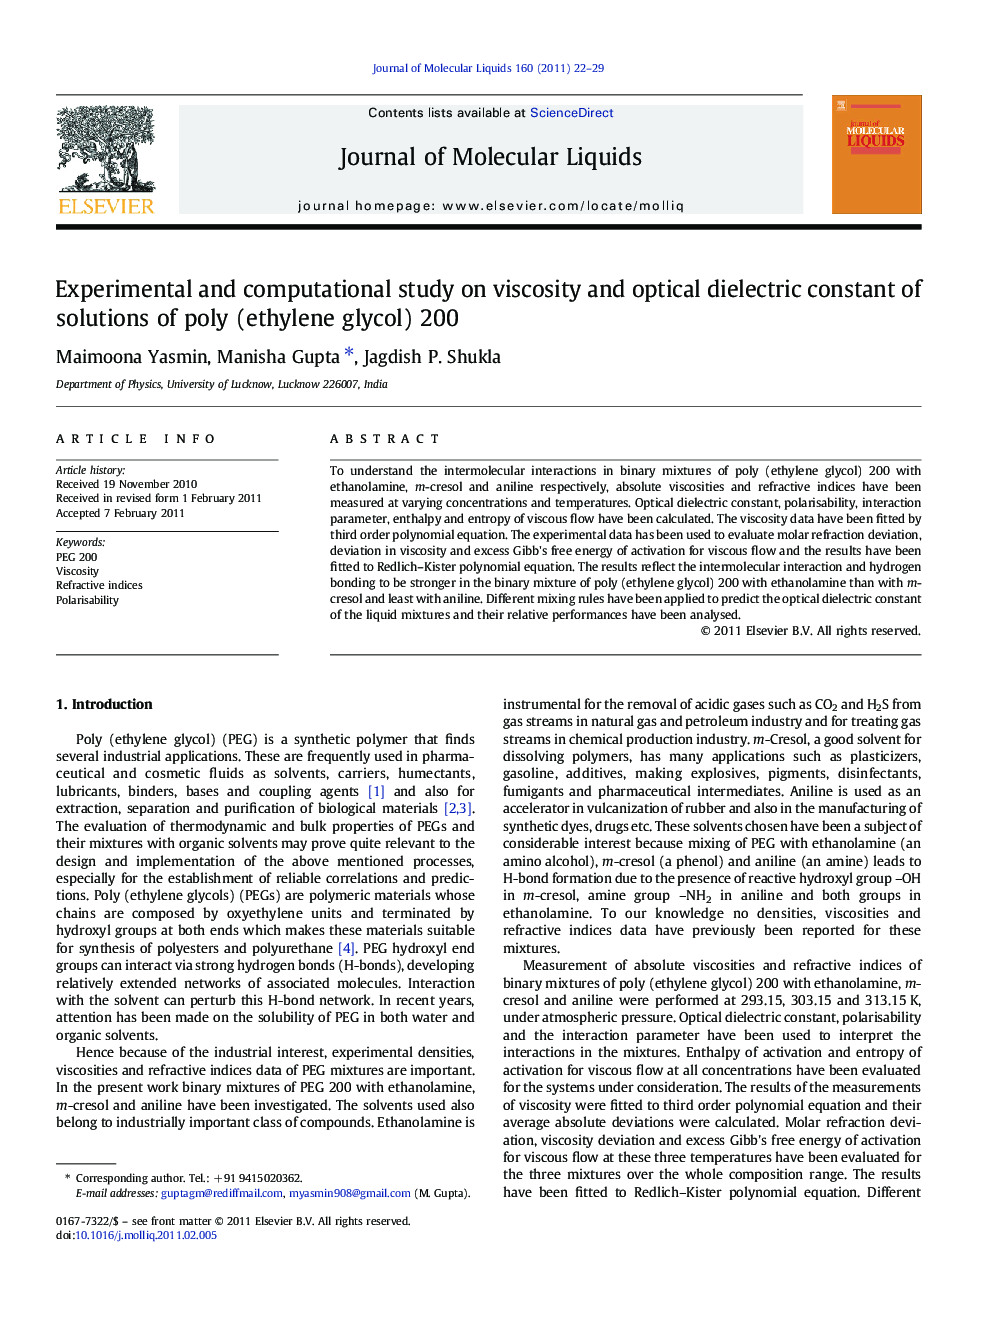 Experimental and computational study on viscosity and optical dielectric constant of solutions of poly (ethylene glycol) 200